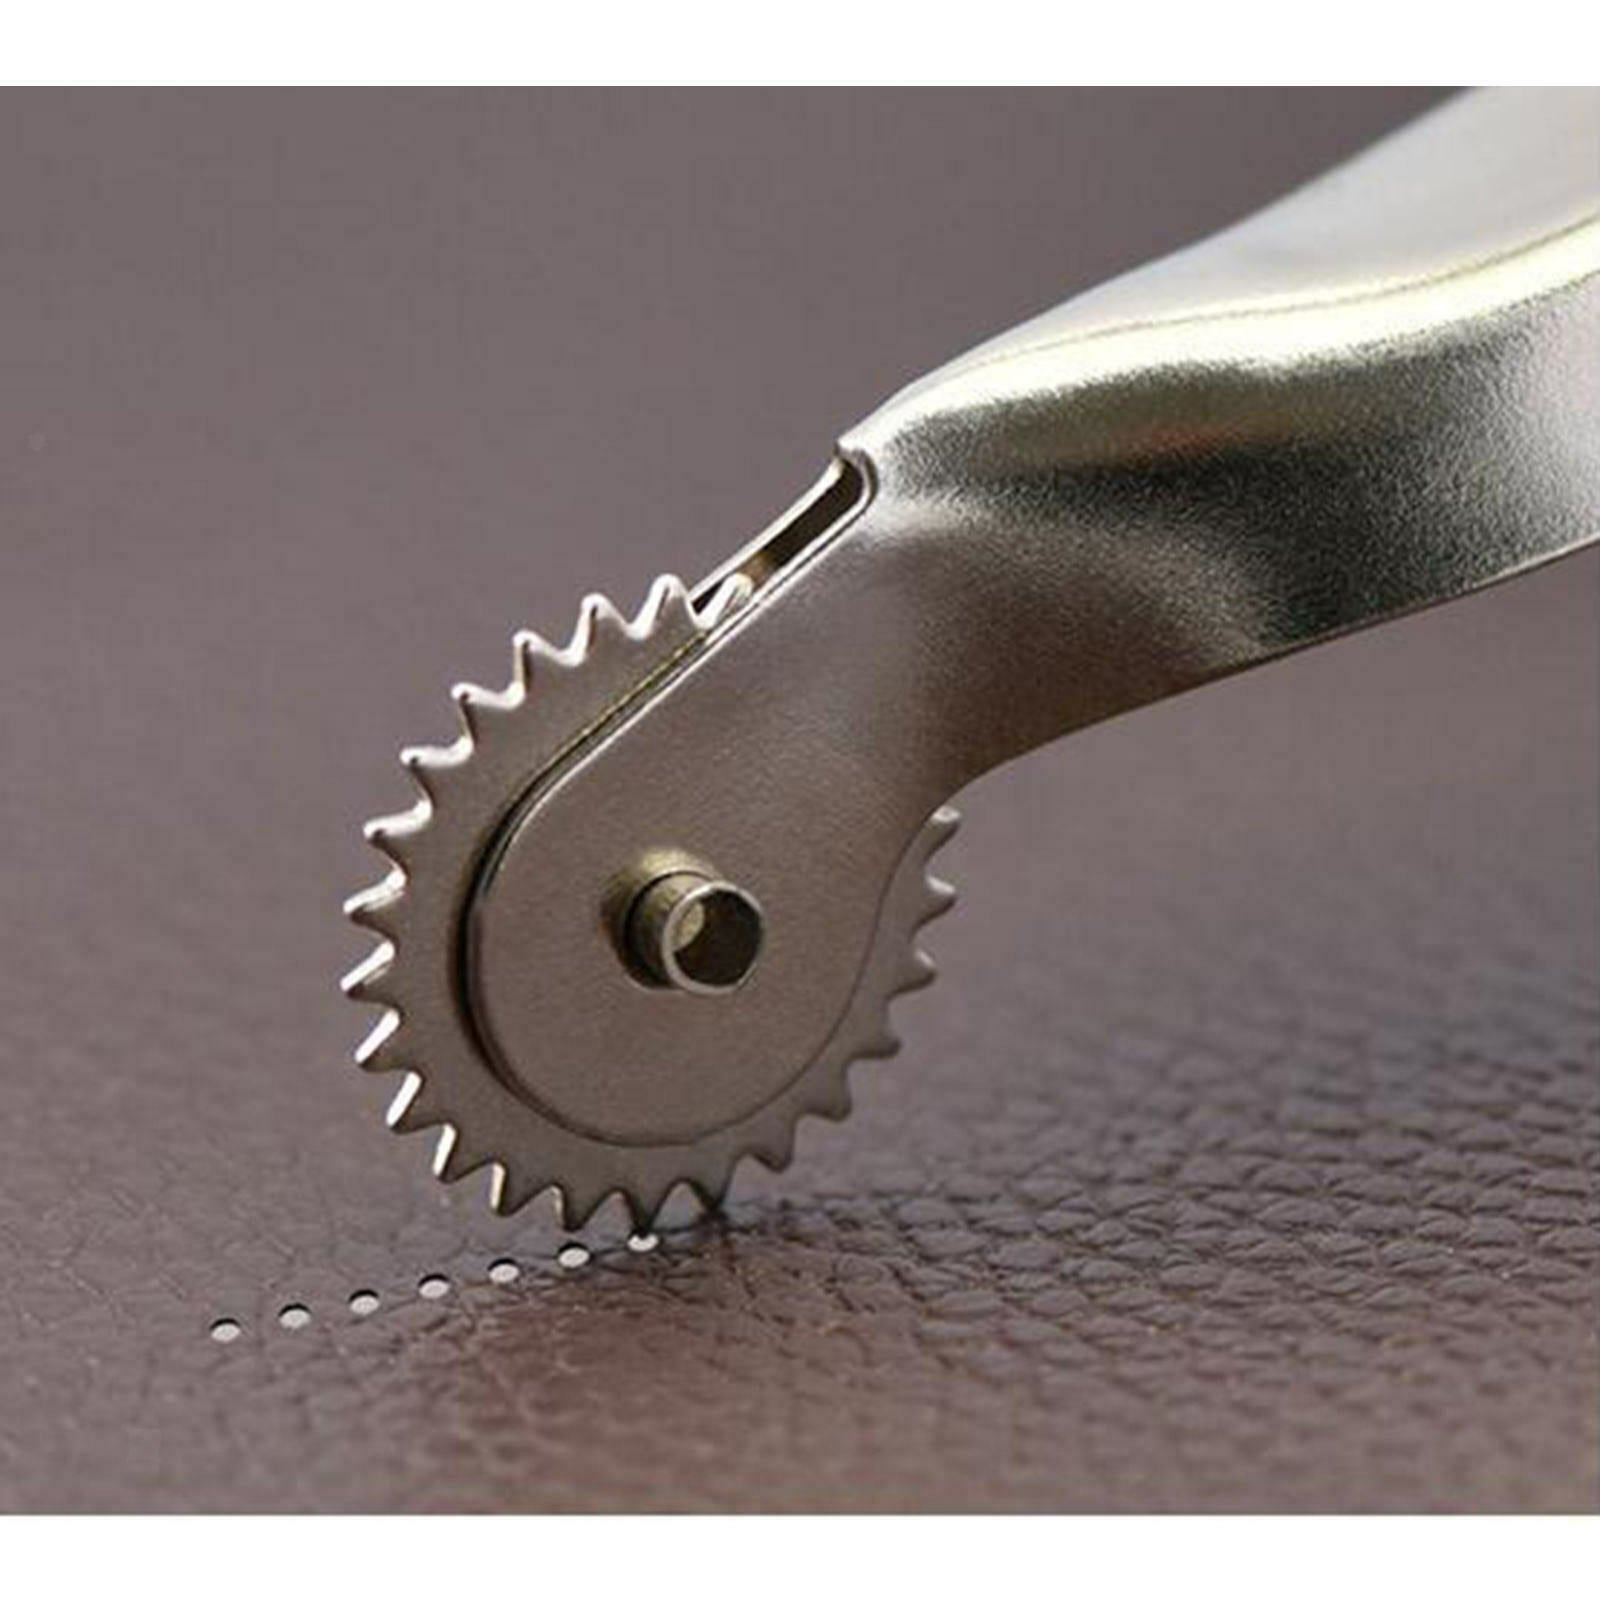 Wheel Tools Sewing Tool Serrated Tracing Wheel for Leather Crafts